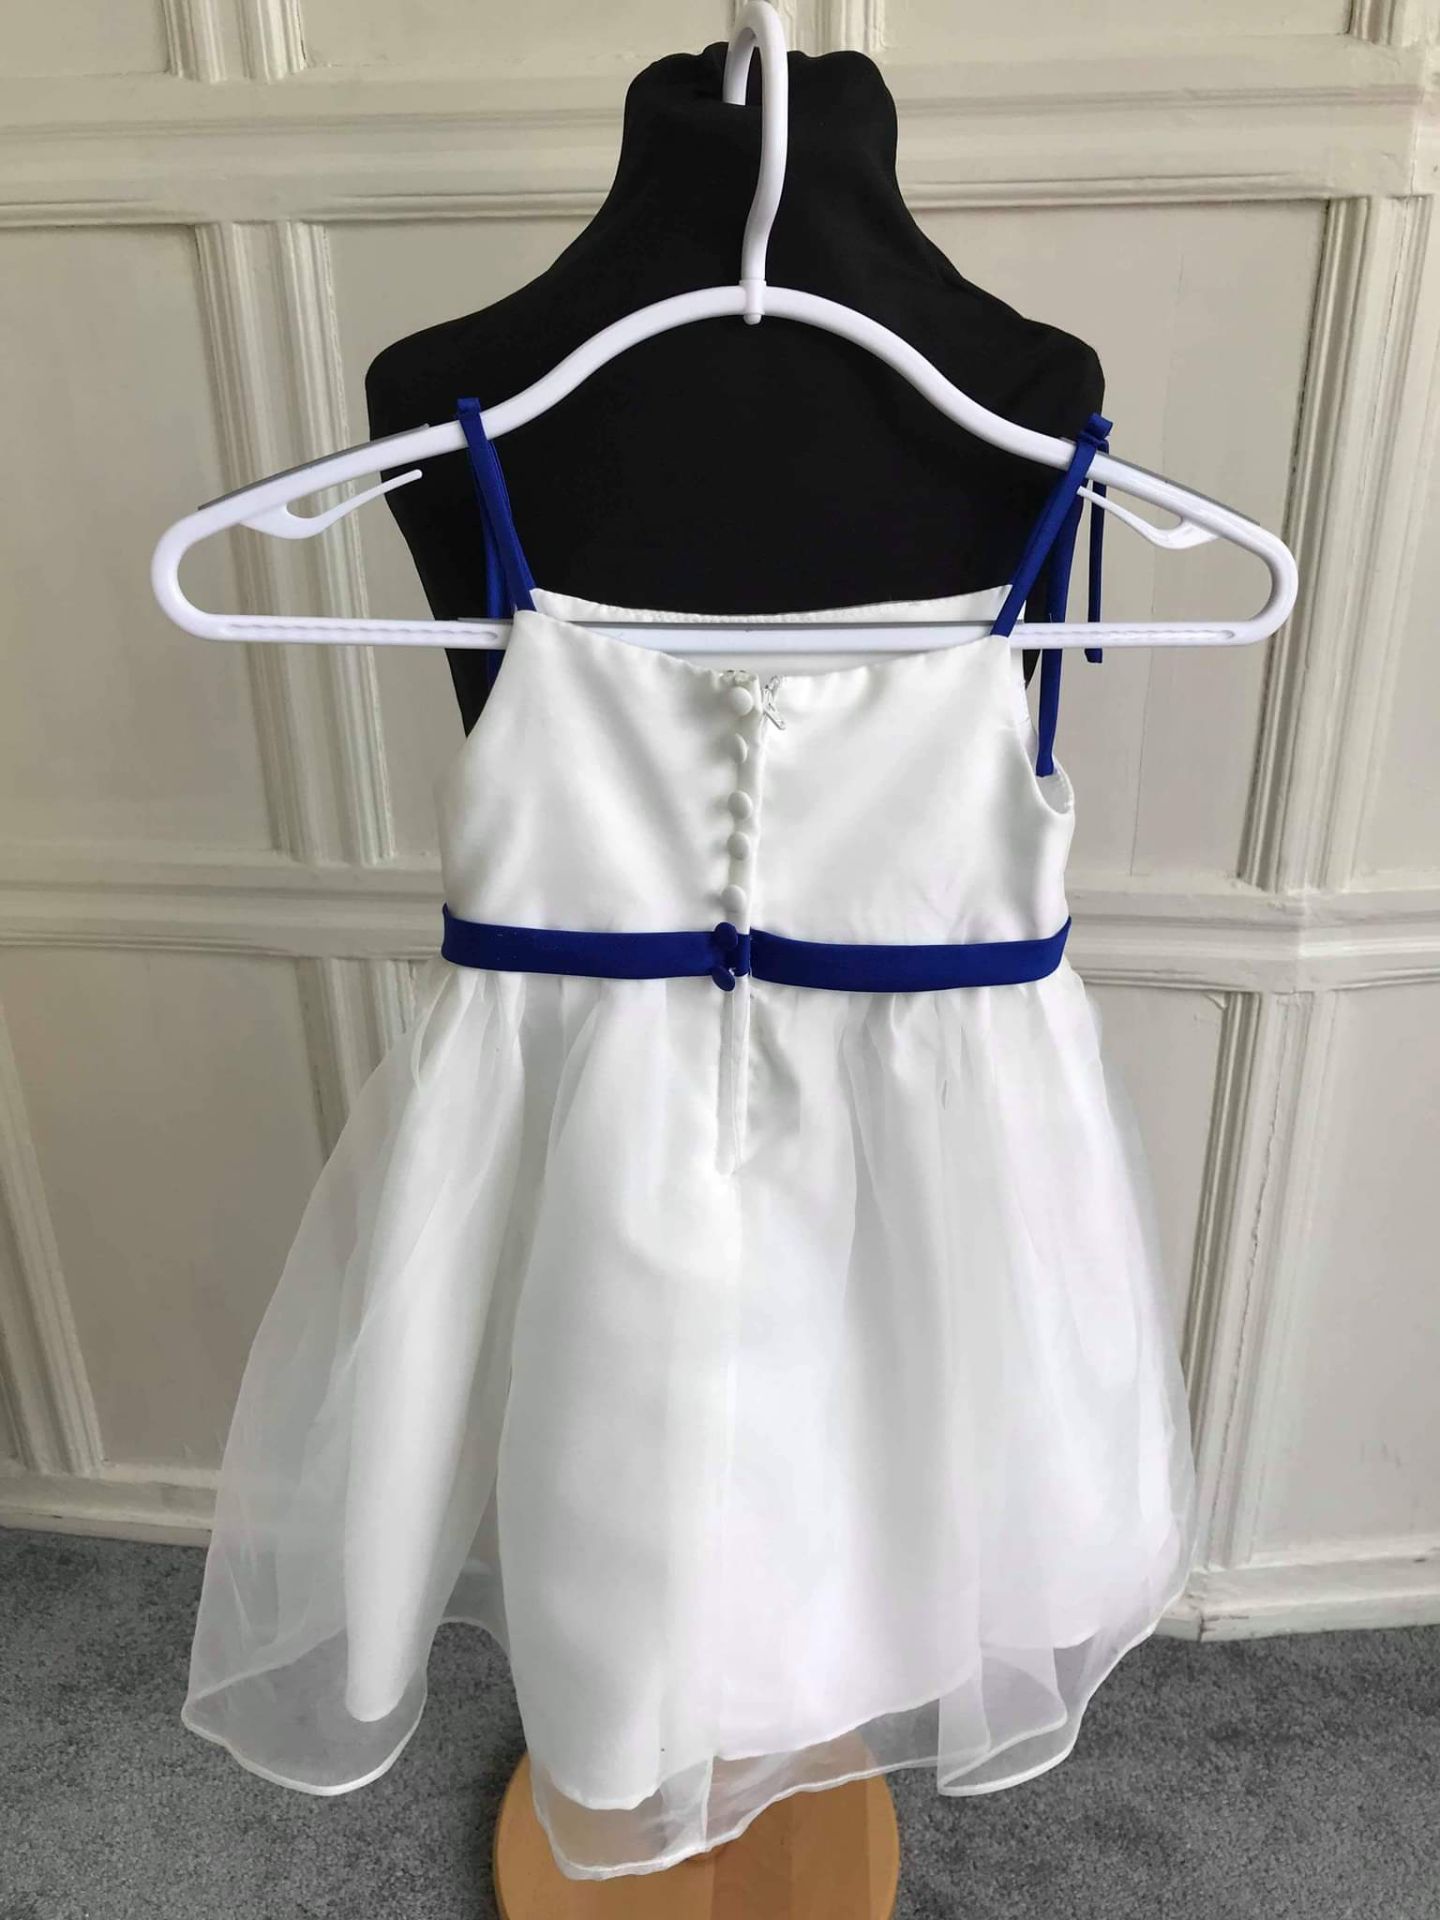 Ivory Flowergirl Dress With Cobalt Blue Straps and Belt - Image 4 of 9